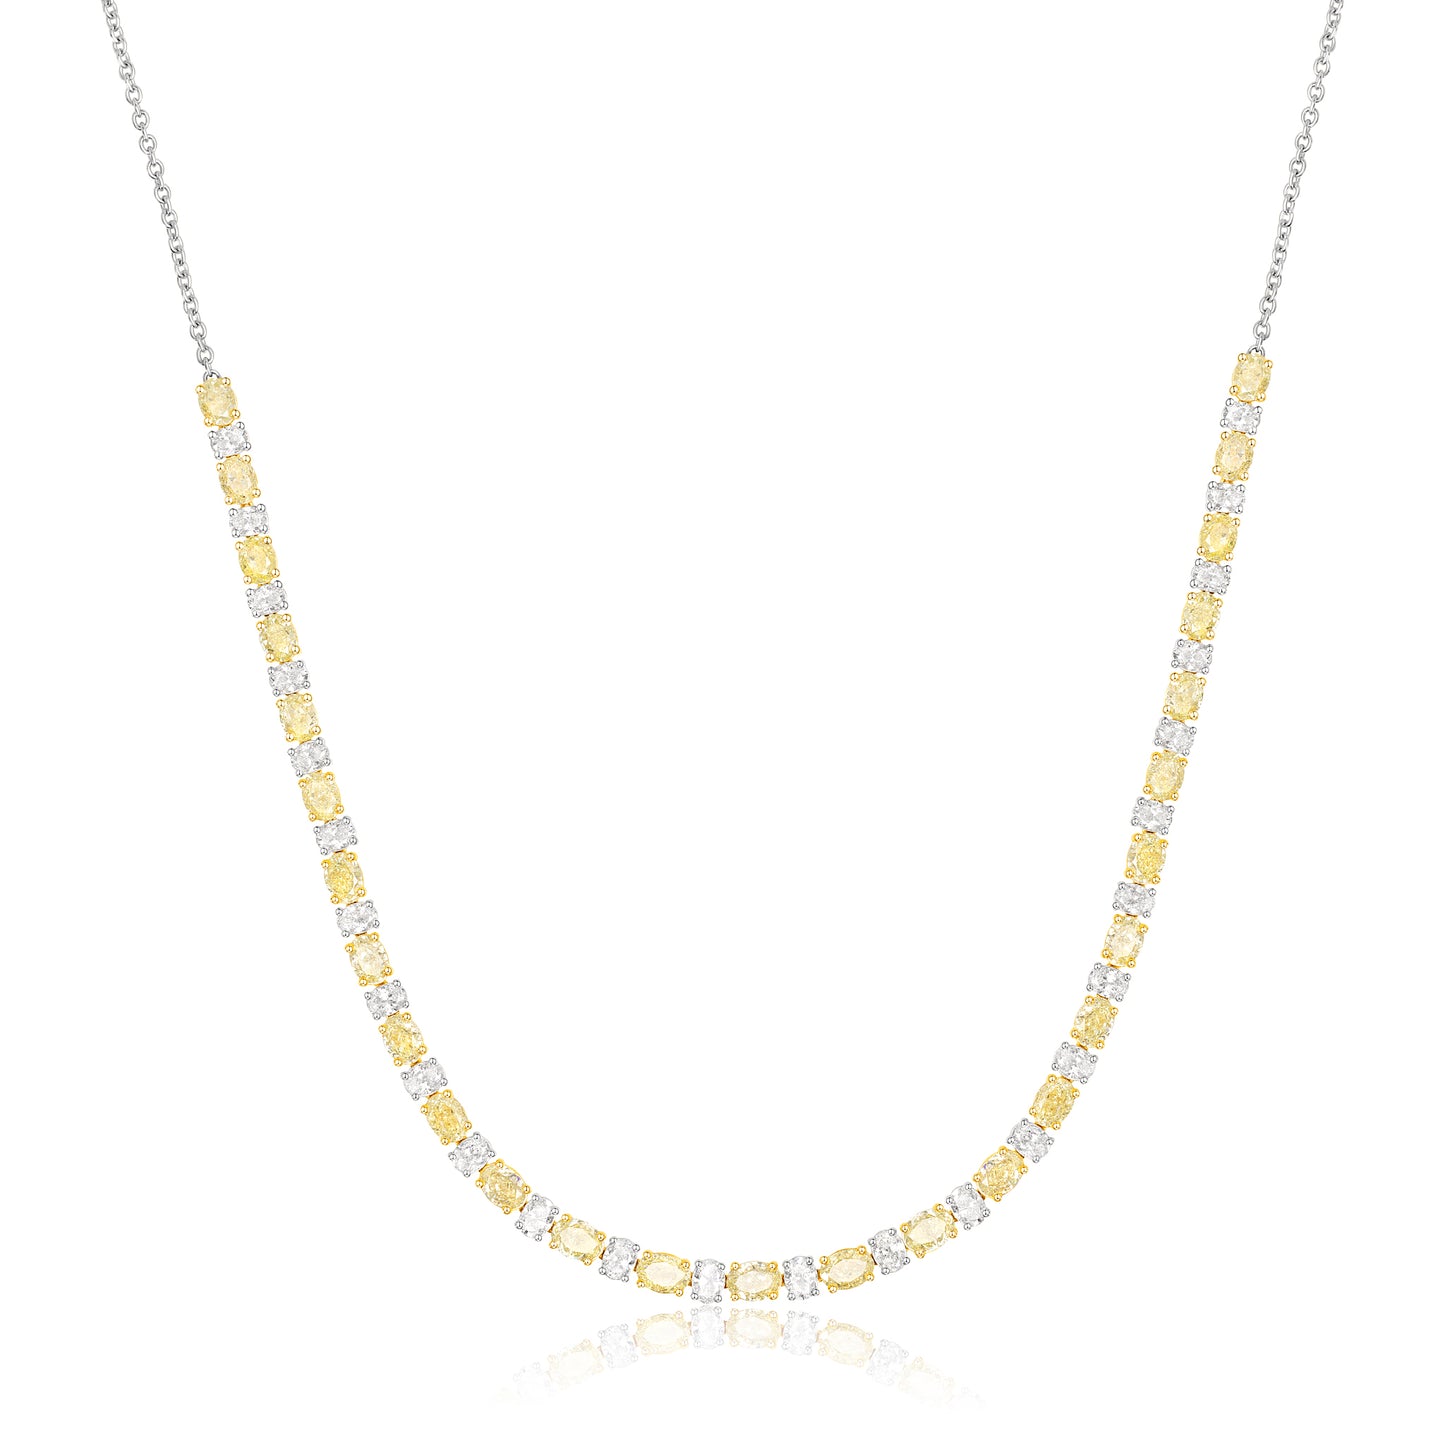 Multi-Shaped Yellow and White Diamond Necklace